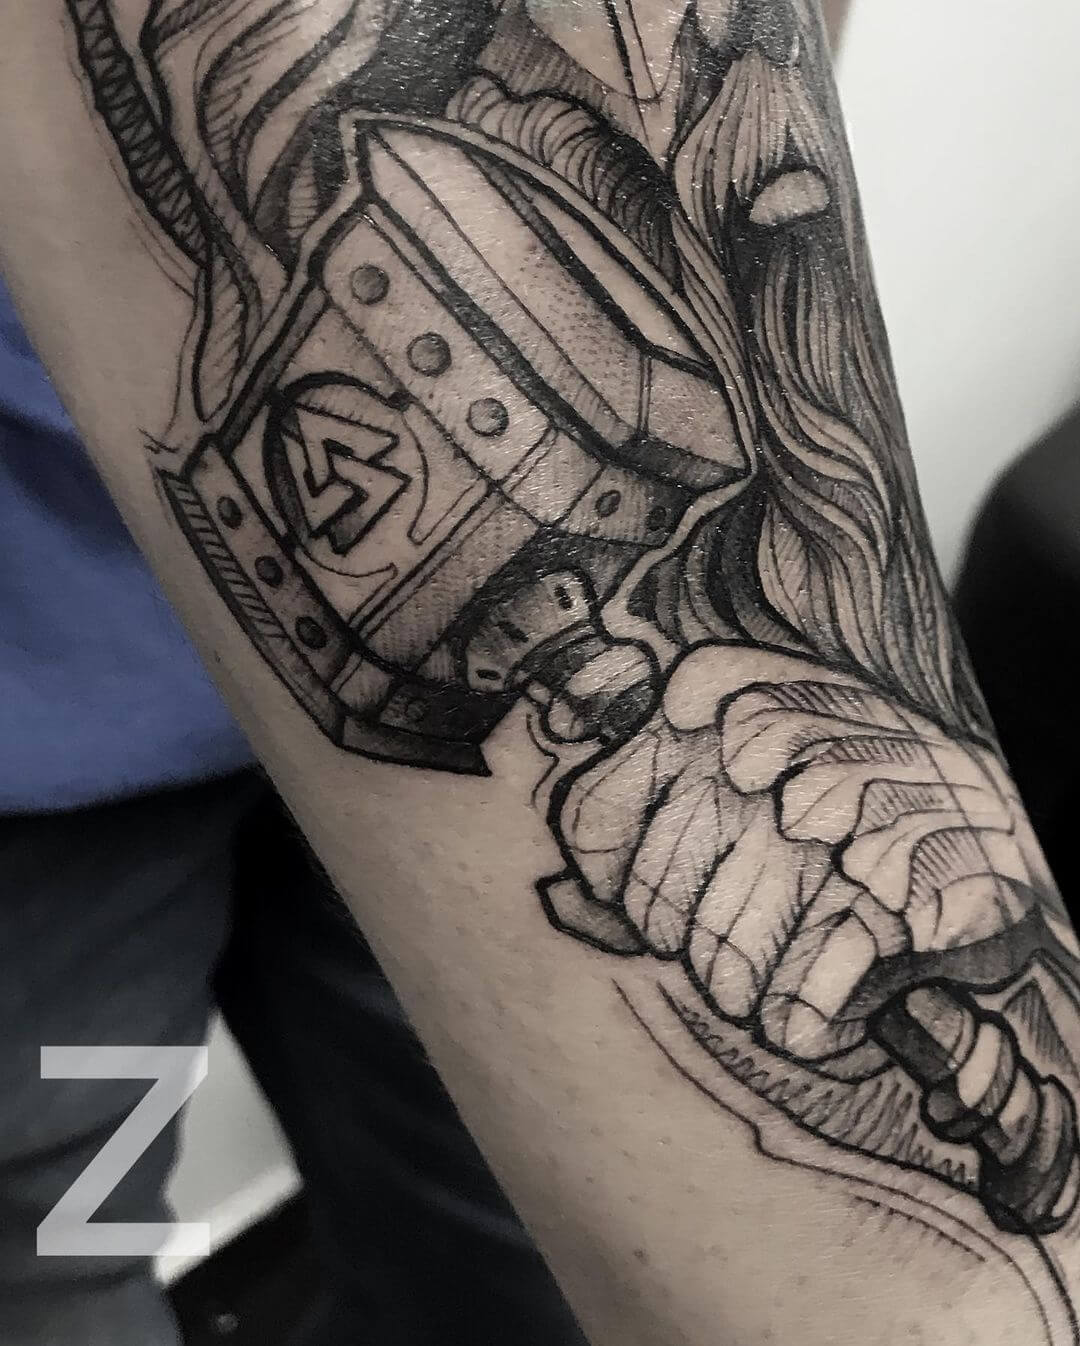 101 Amazing Thor Tattoo Ideas You Need To See! | Outsons | Men's